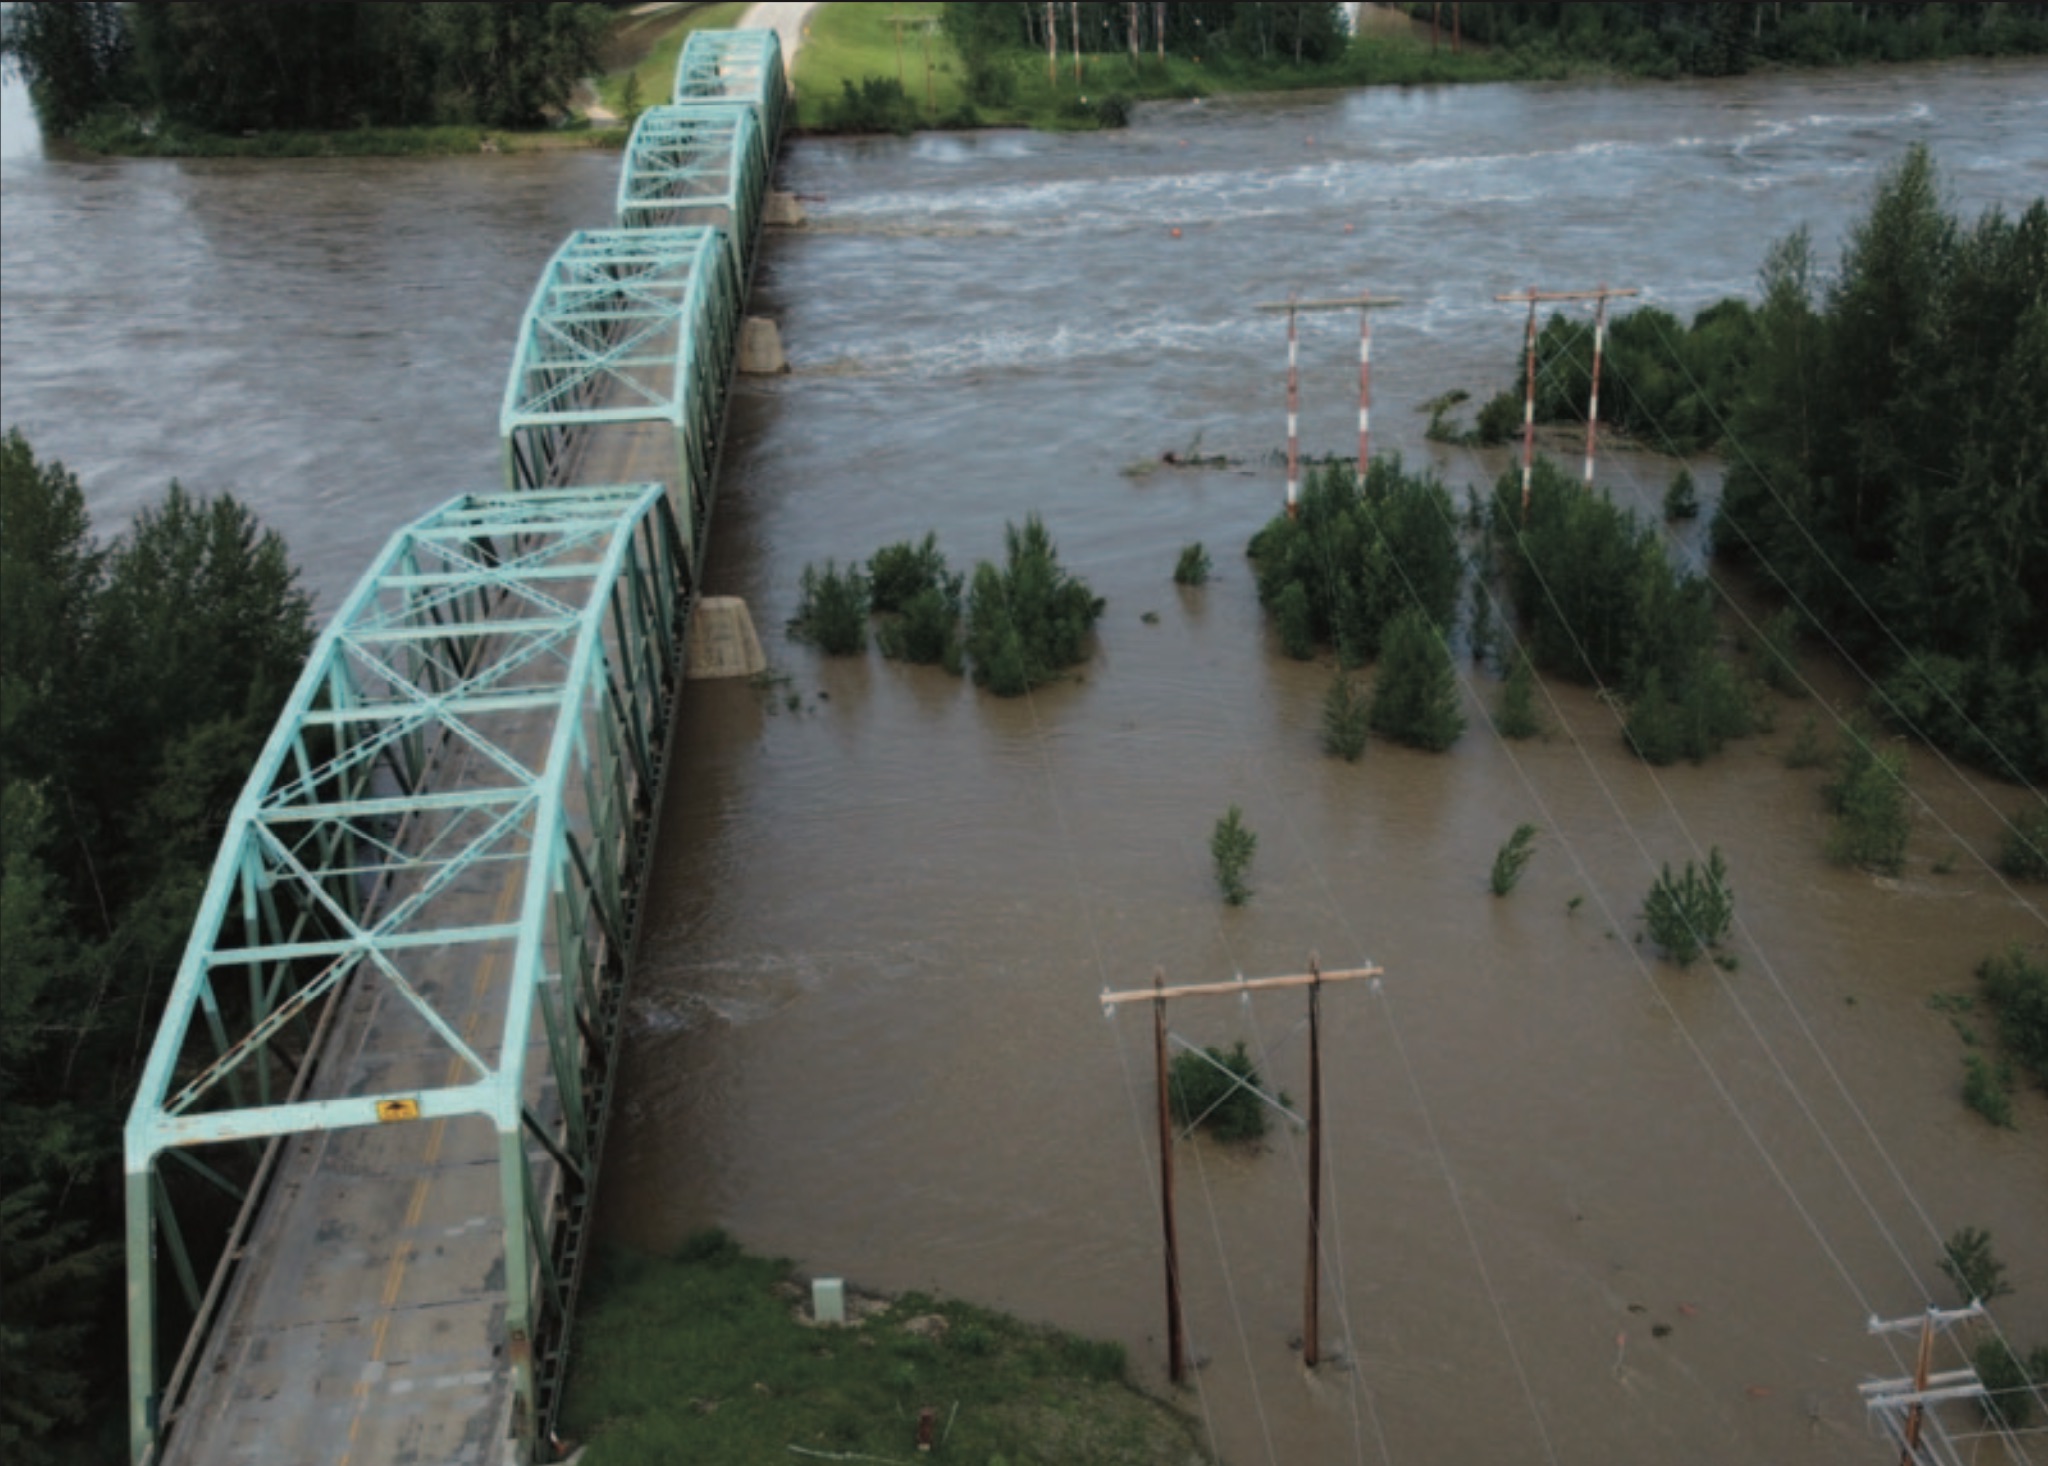 From Wildfires to Floods: Alberta Faces Summer Of Uncertainty